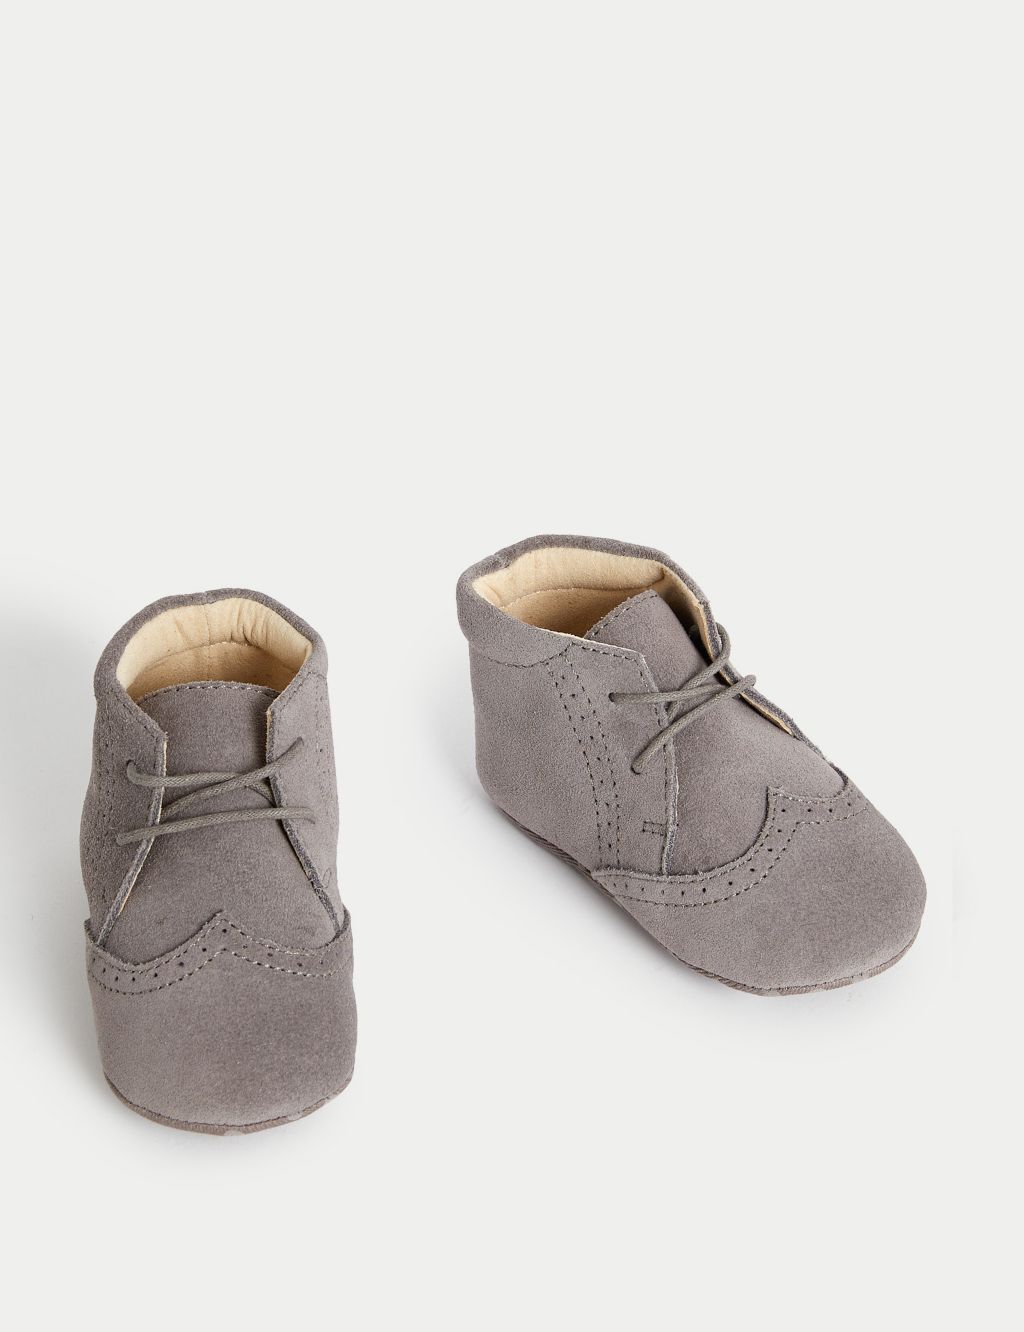 Baby Gift Boxed Suede Pram Shoes (0-18 Mths) image 2